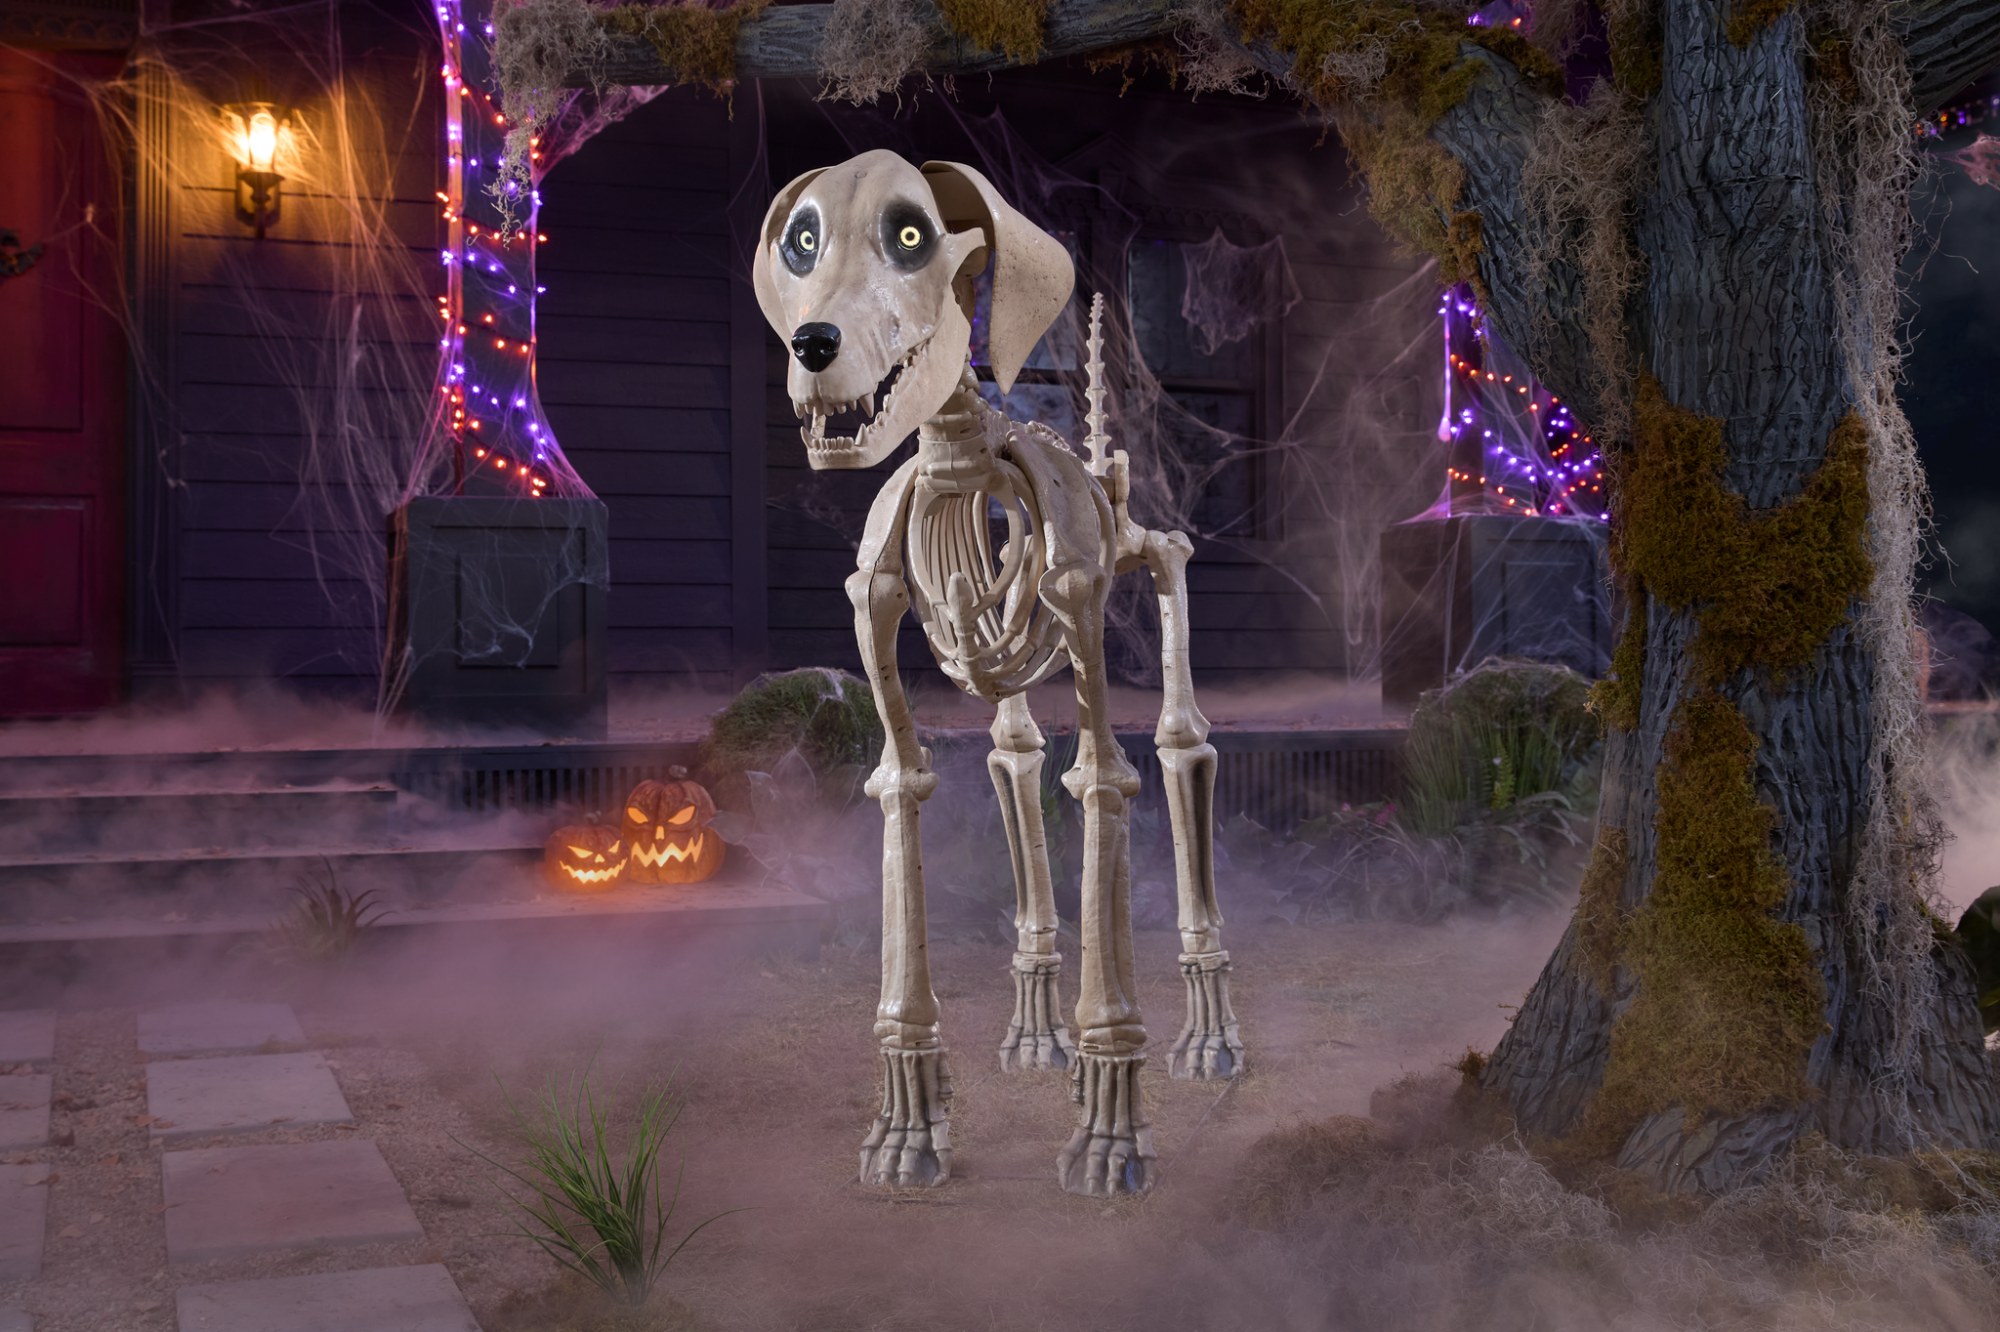 the 5 Ft. Skeleton Dog from home depot in front of a spooky, smoky house